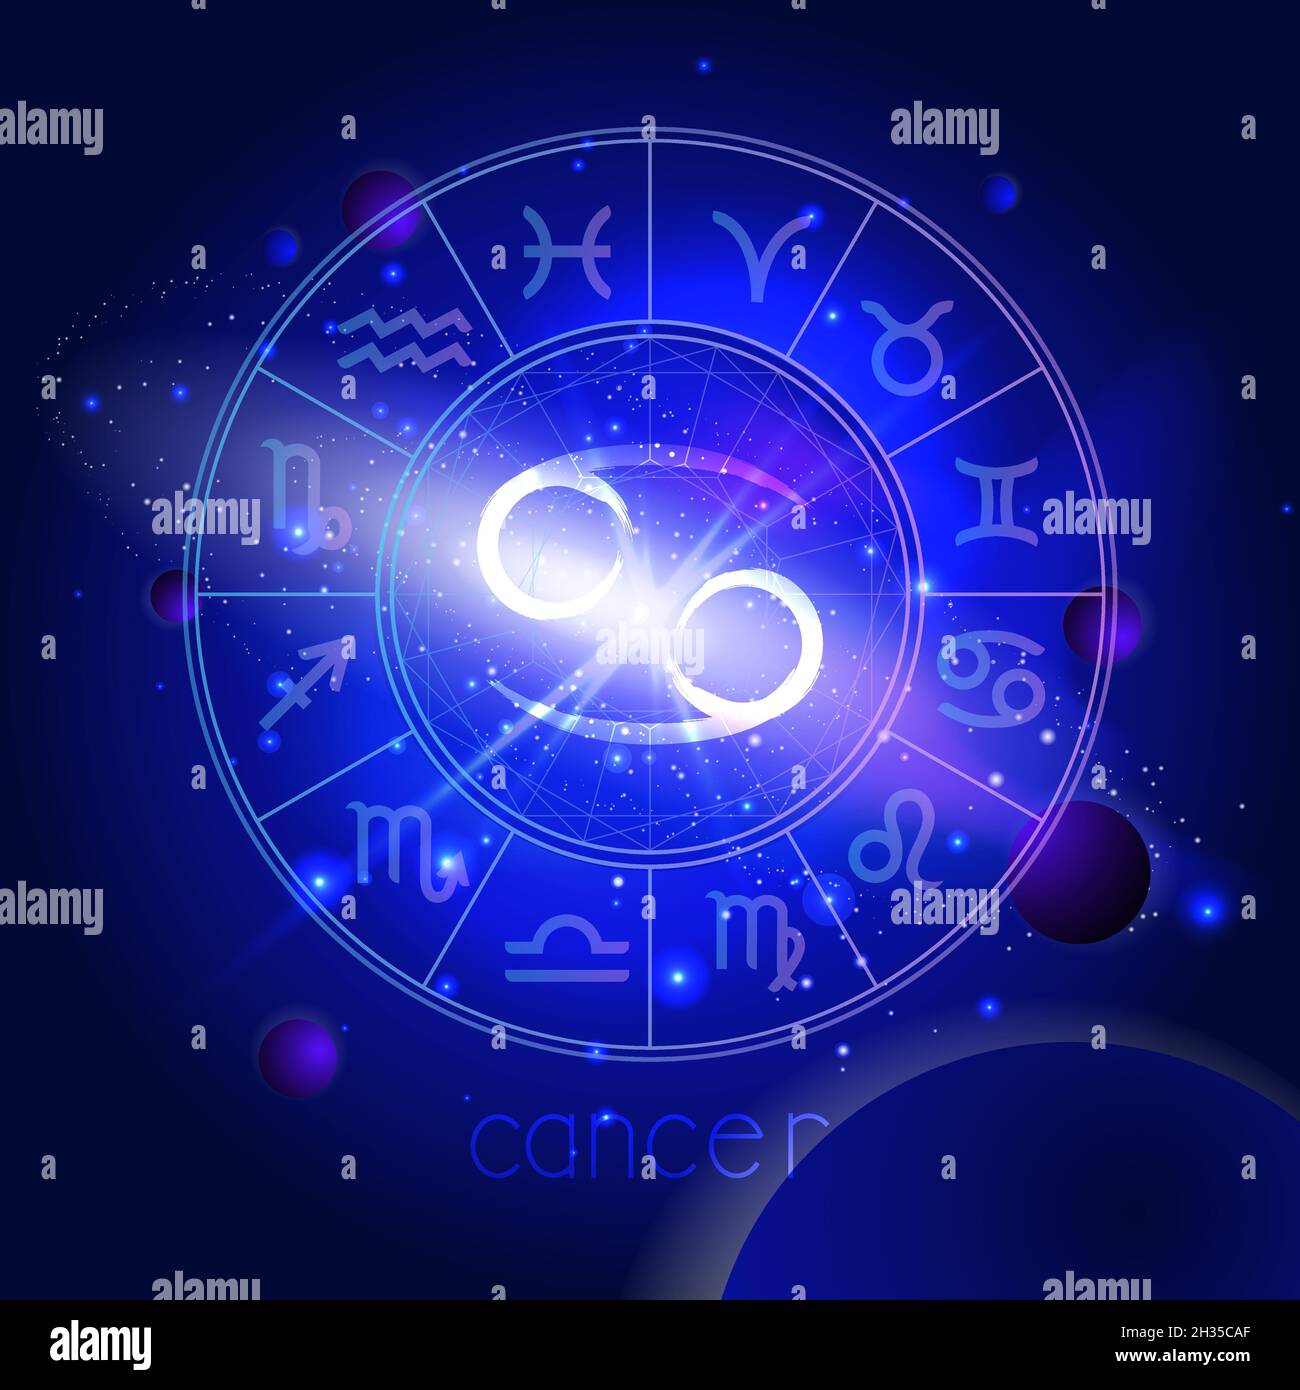 Vector illustration of sign CANCER with Horoscope circle against the space background with planets and stars. Sacred symbols in blue colors. Stock Vector